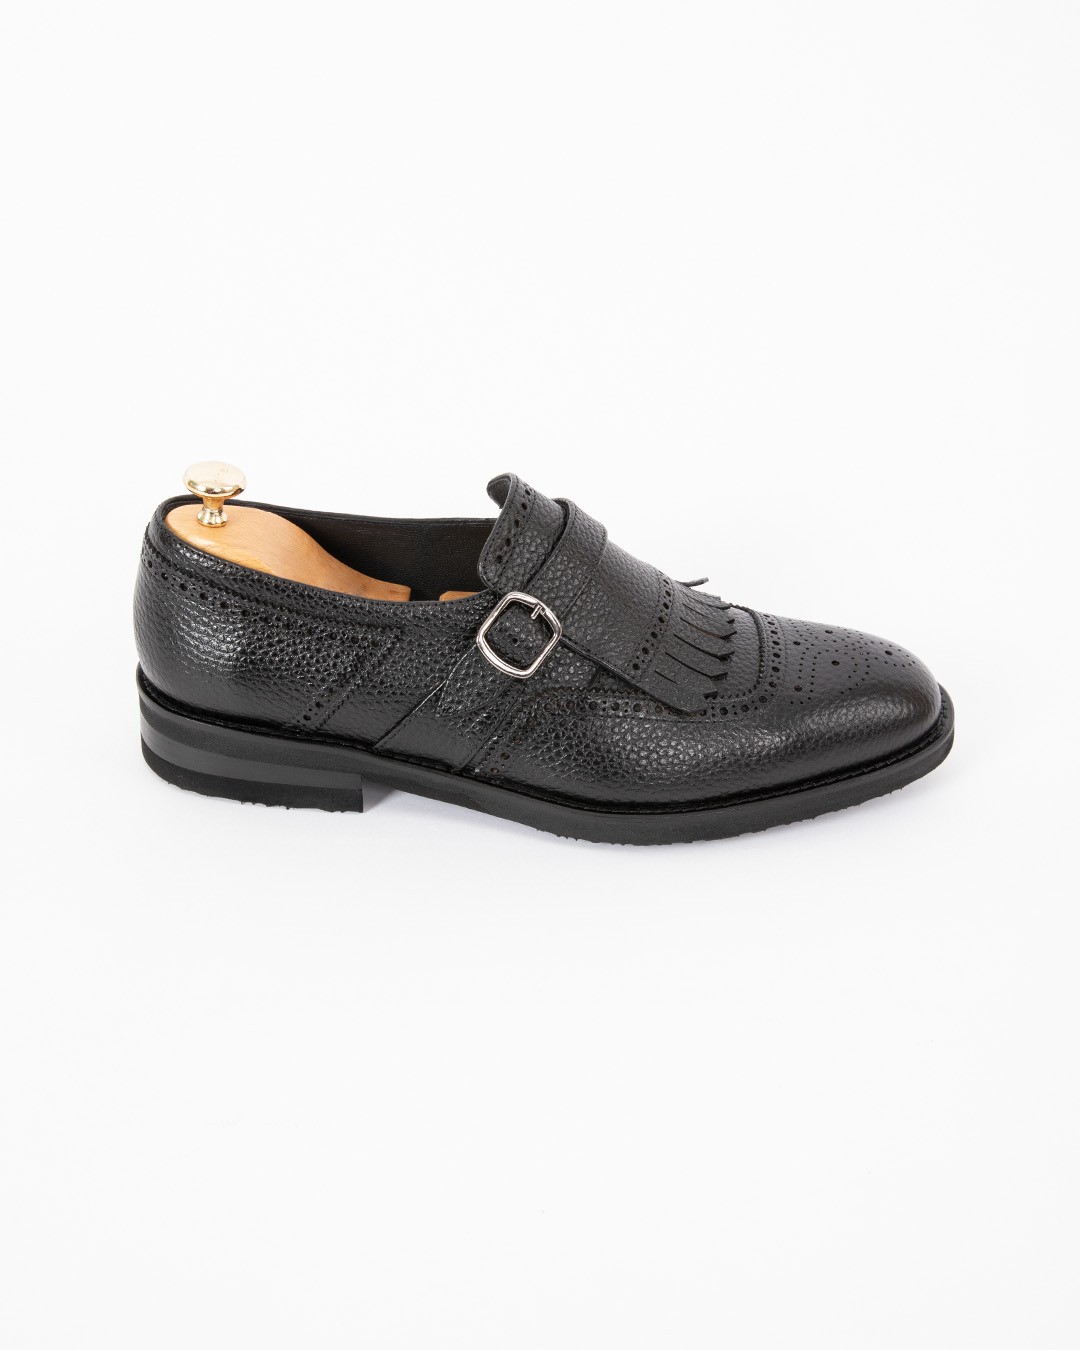 Buckled Shoes - Black